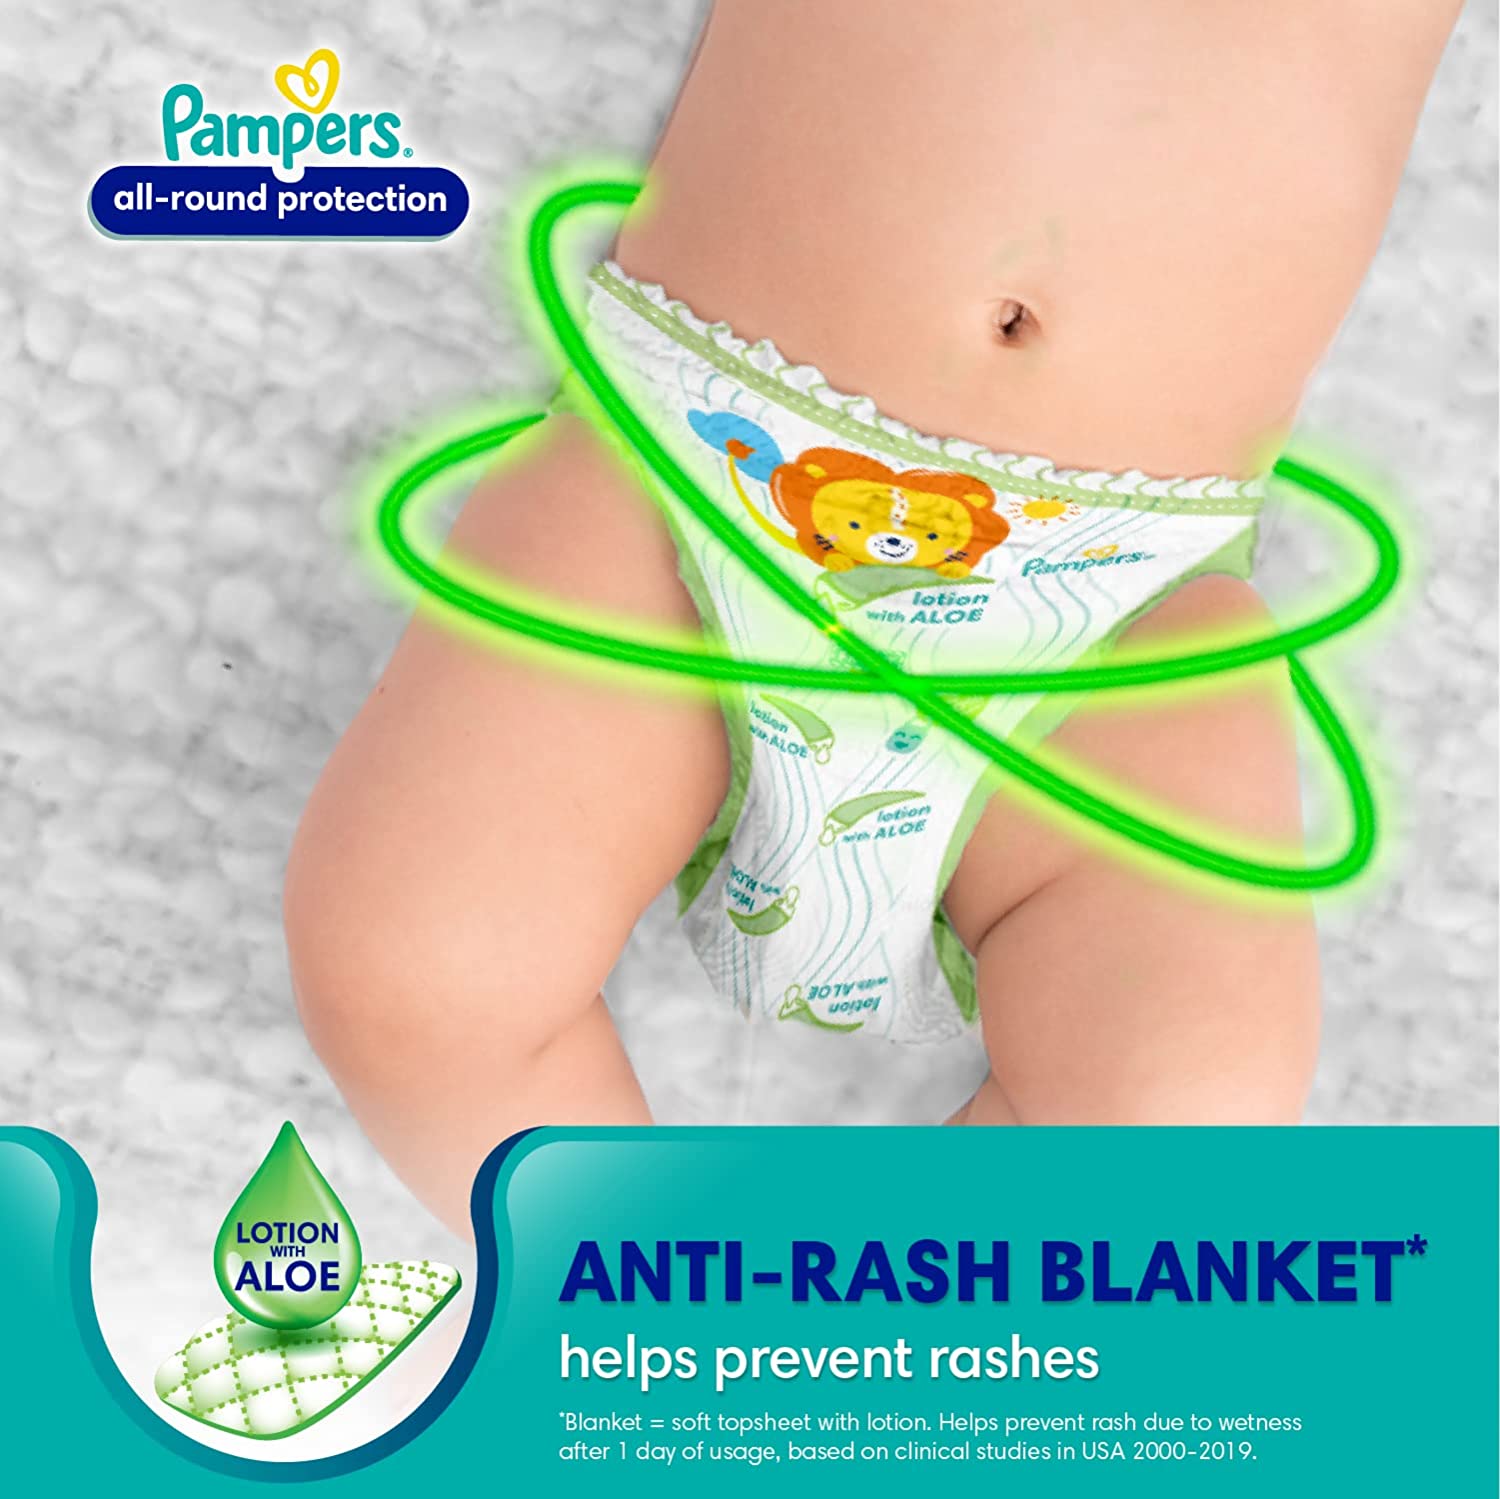 Pampers Diaper Pants (S)- (56 Pieces)